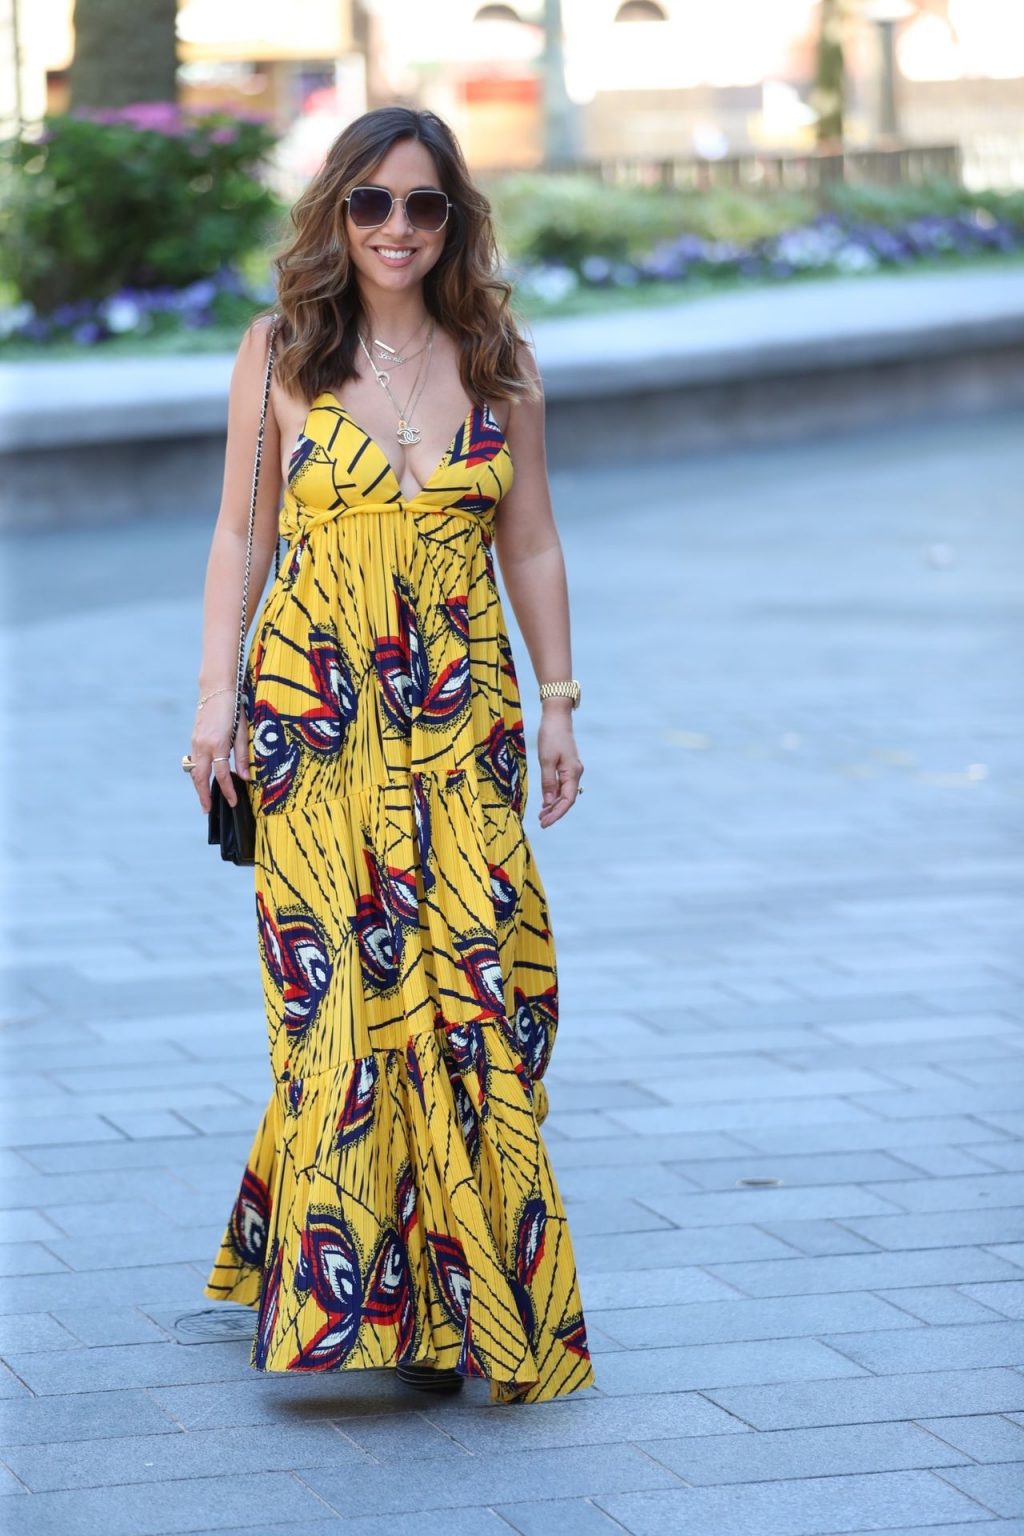 Myleene Klass Shows Off Her Cleavage in a Maxi Dress in London (15 Photos)